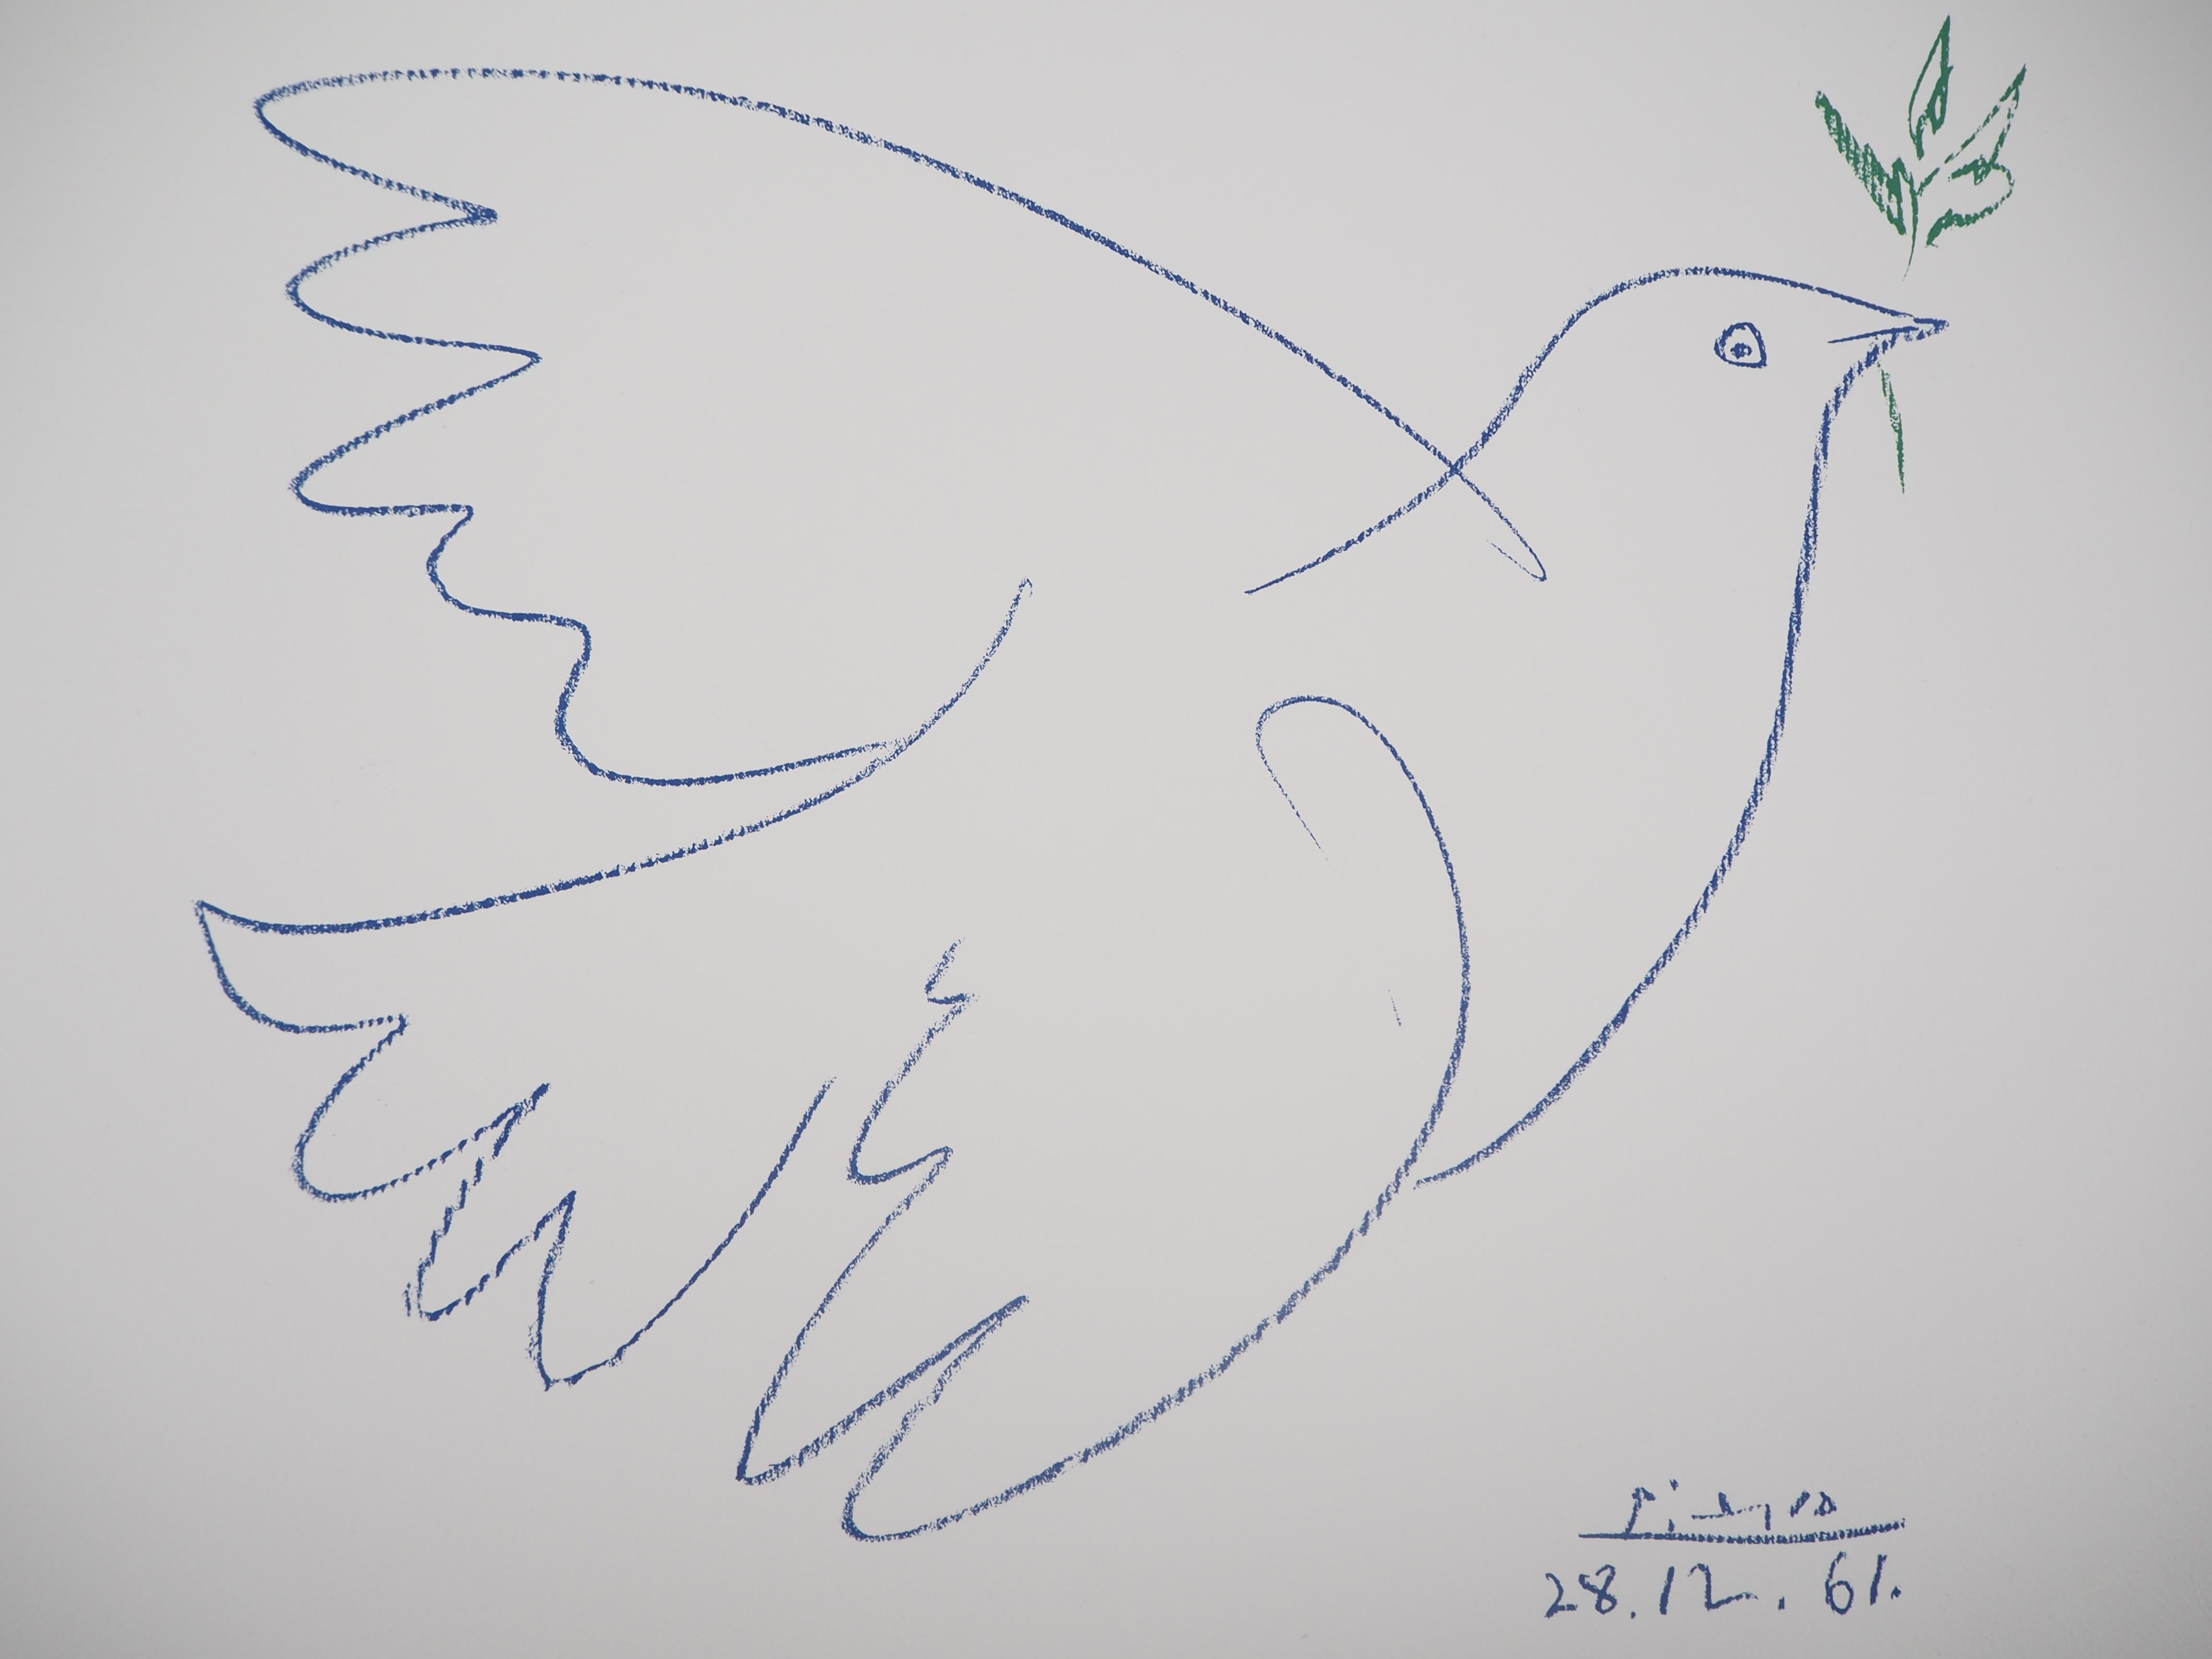 Pablo Picasso (after)
Dove of Peace

Lithograph
Signature printed in the plate
Dated 28-12-61 in the plate
On Arches vellum 38 x 56 cm (c. 14.9 x 22 inch)

Excellent condition

Information : Picasso offered this lithograph and the rights to edit it